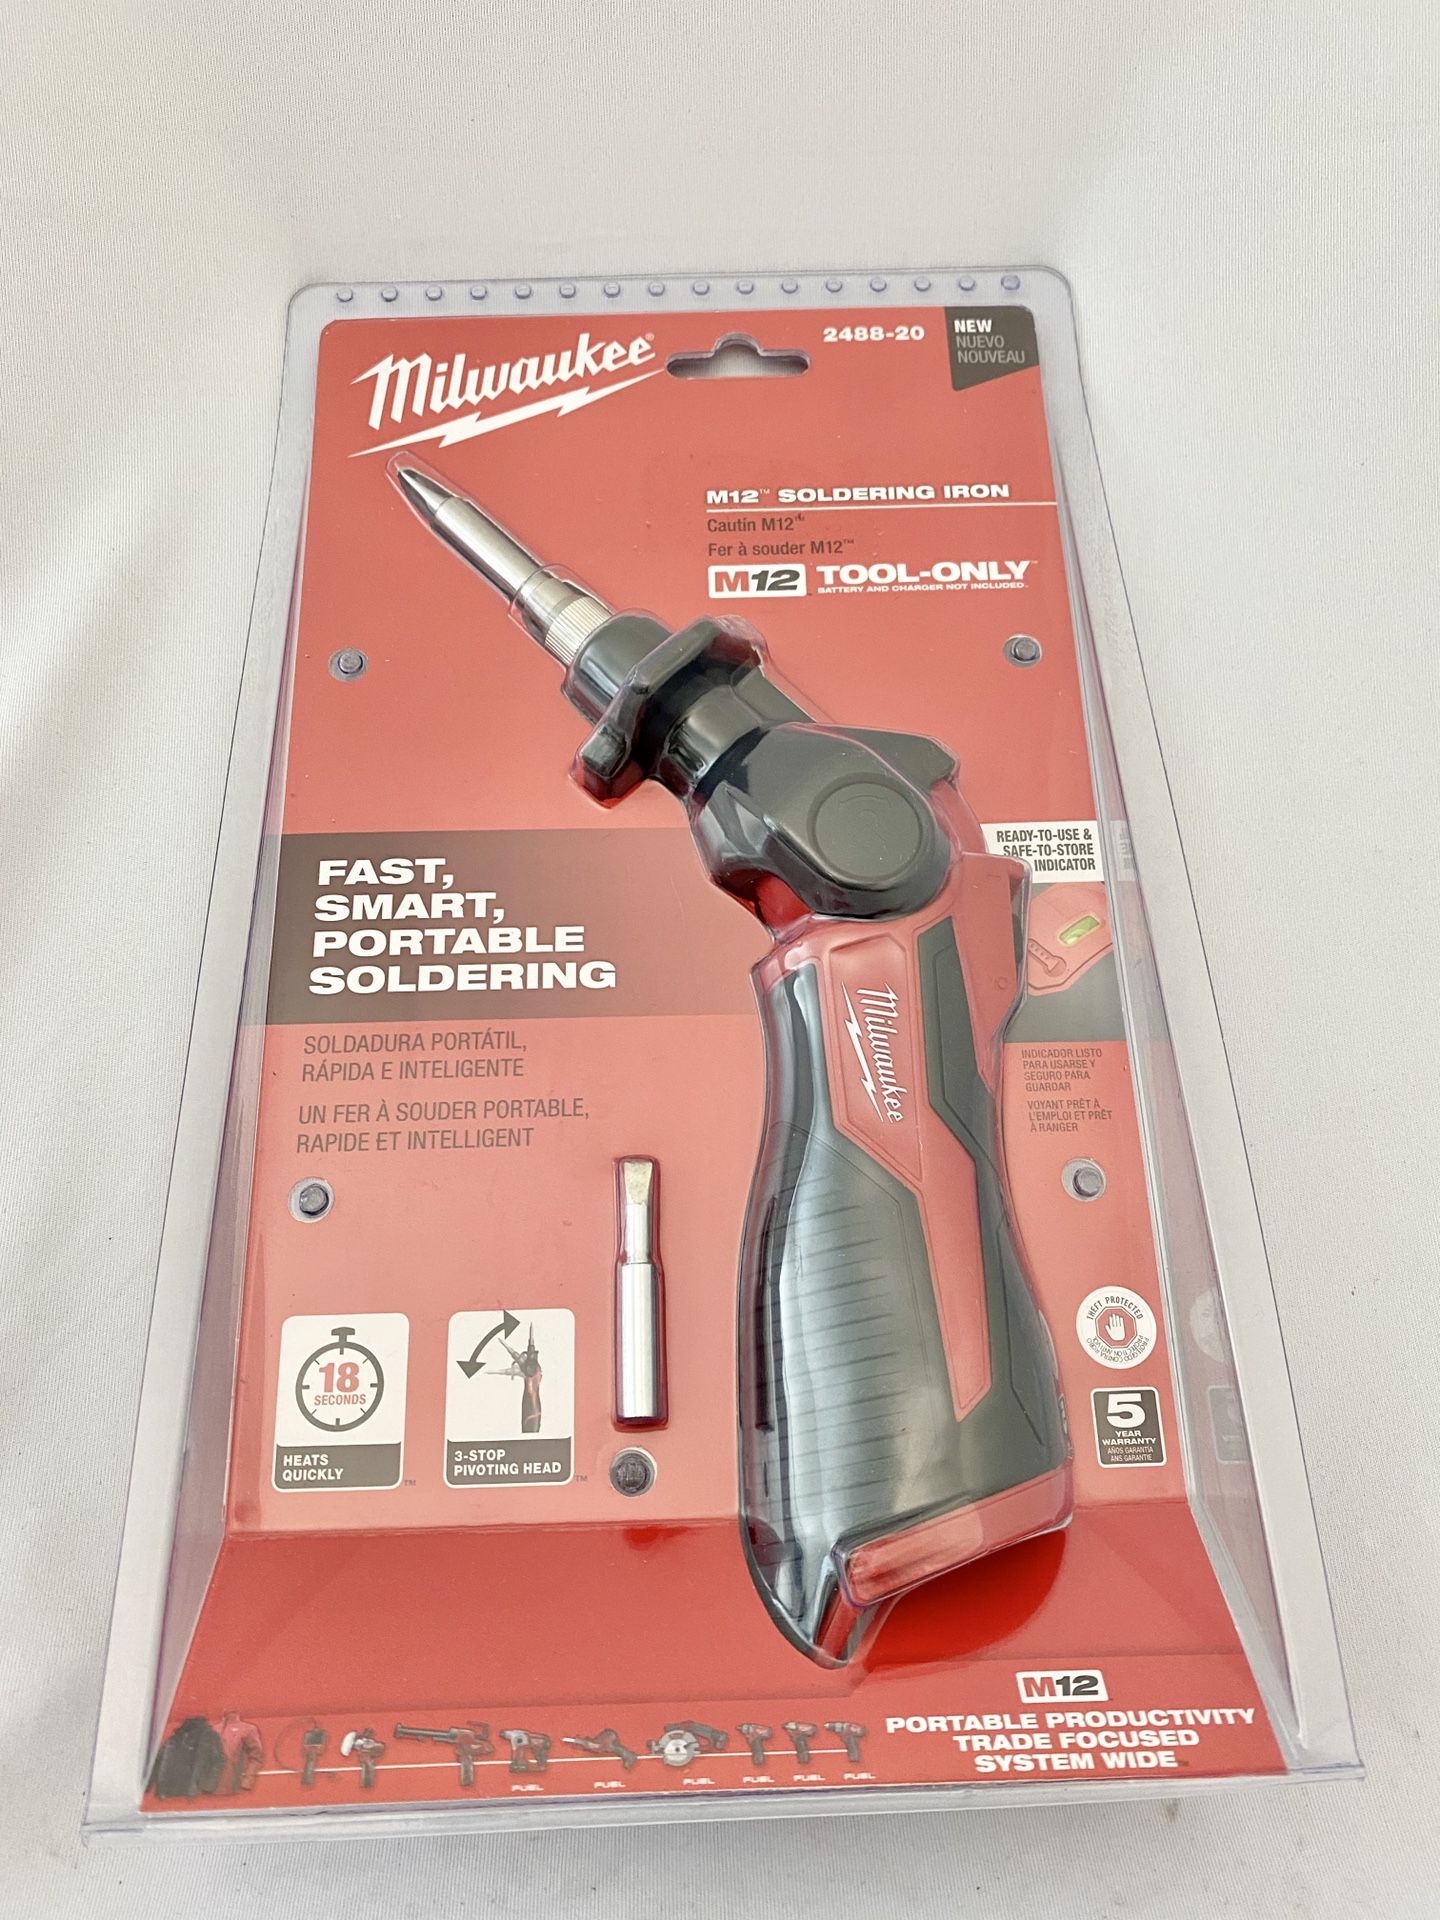 Milwaukee 2488-20 M12 12-Volt Lith-Ion Cordless Soldering Iron (Tool-Only) NEW